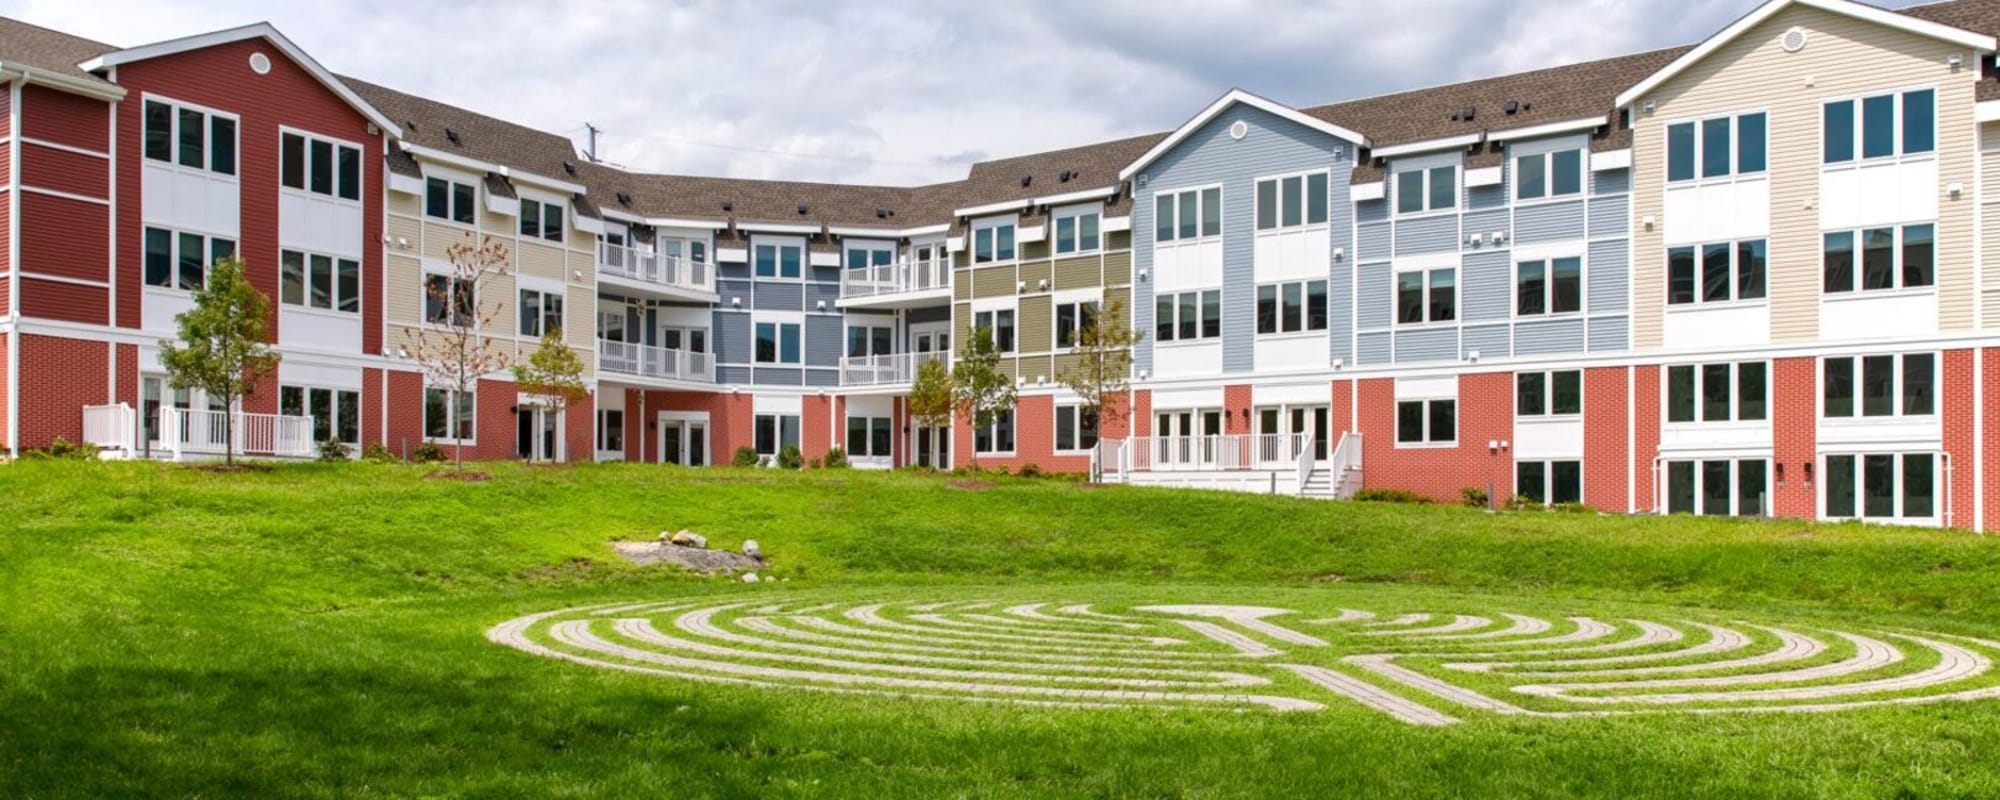 Apartments at Metro Green Court in Stamford, Connecticut